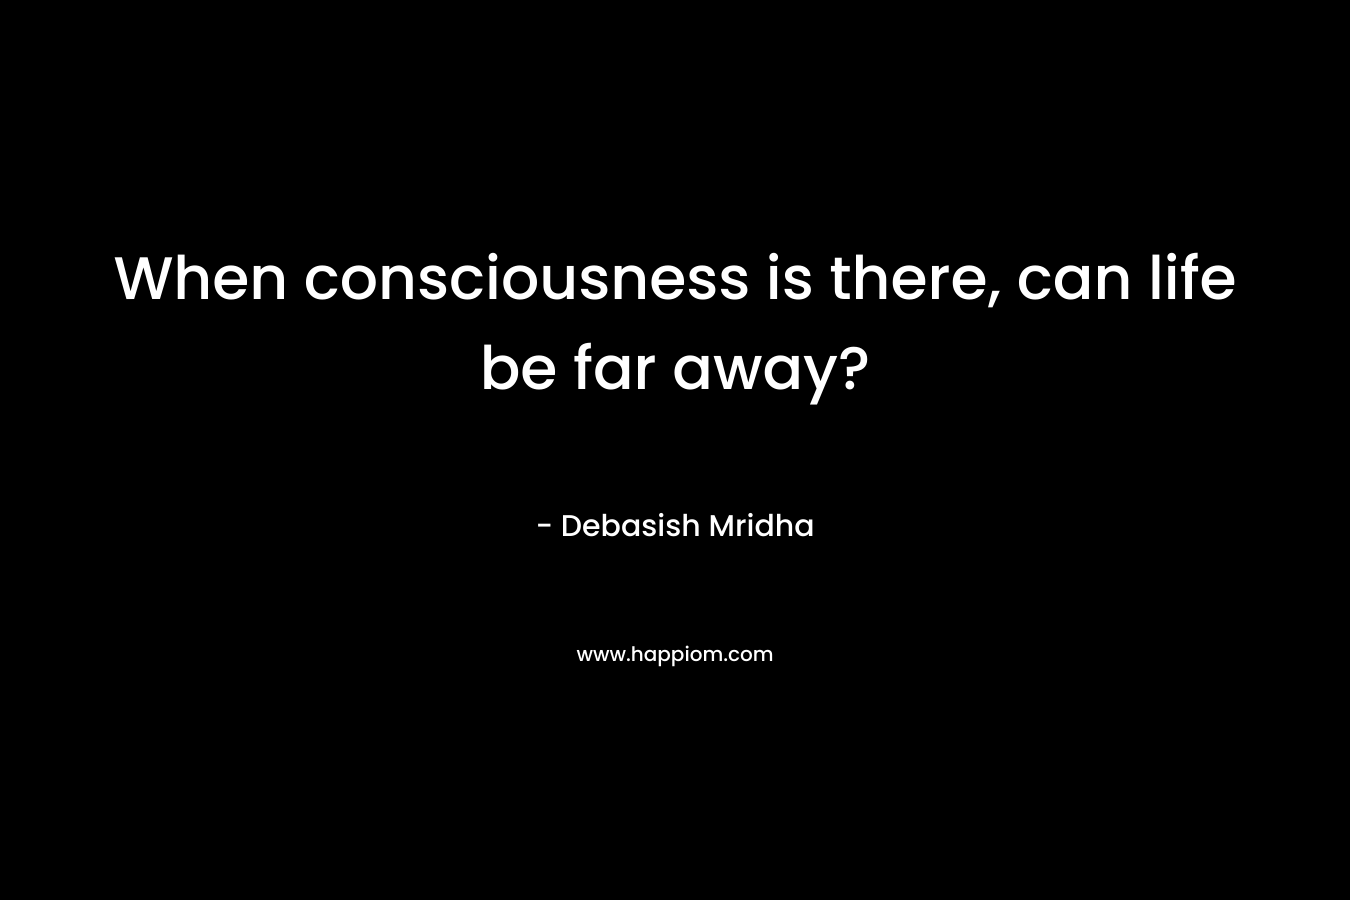 When consciousness is there, can life be far away?